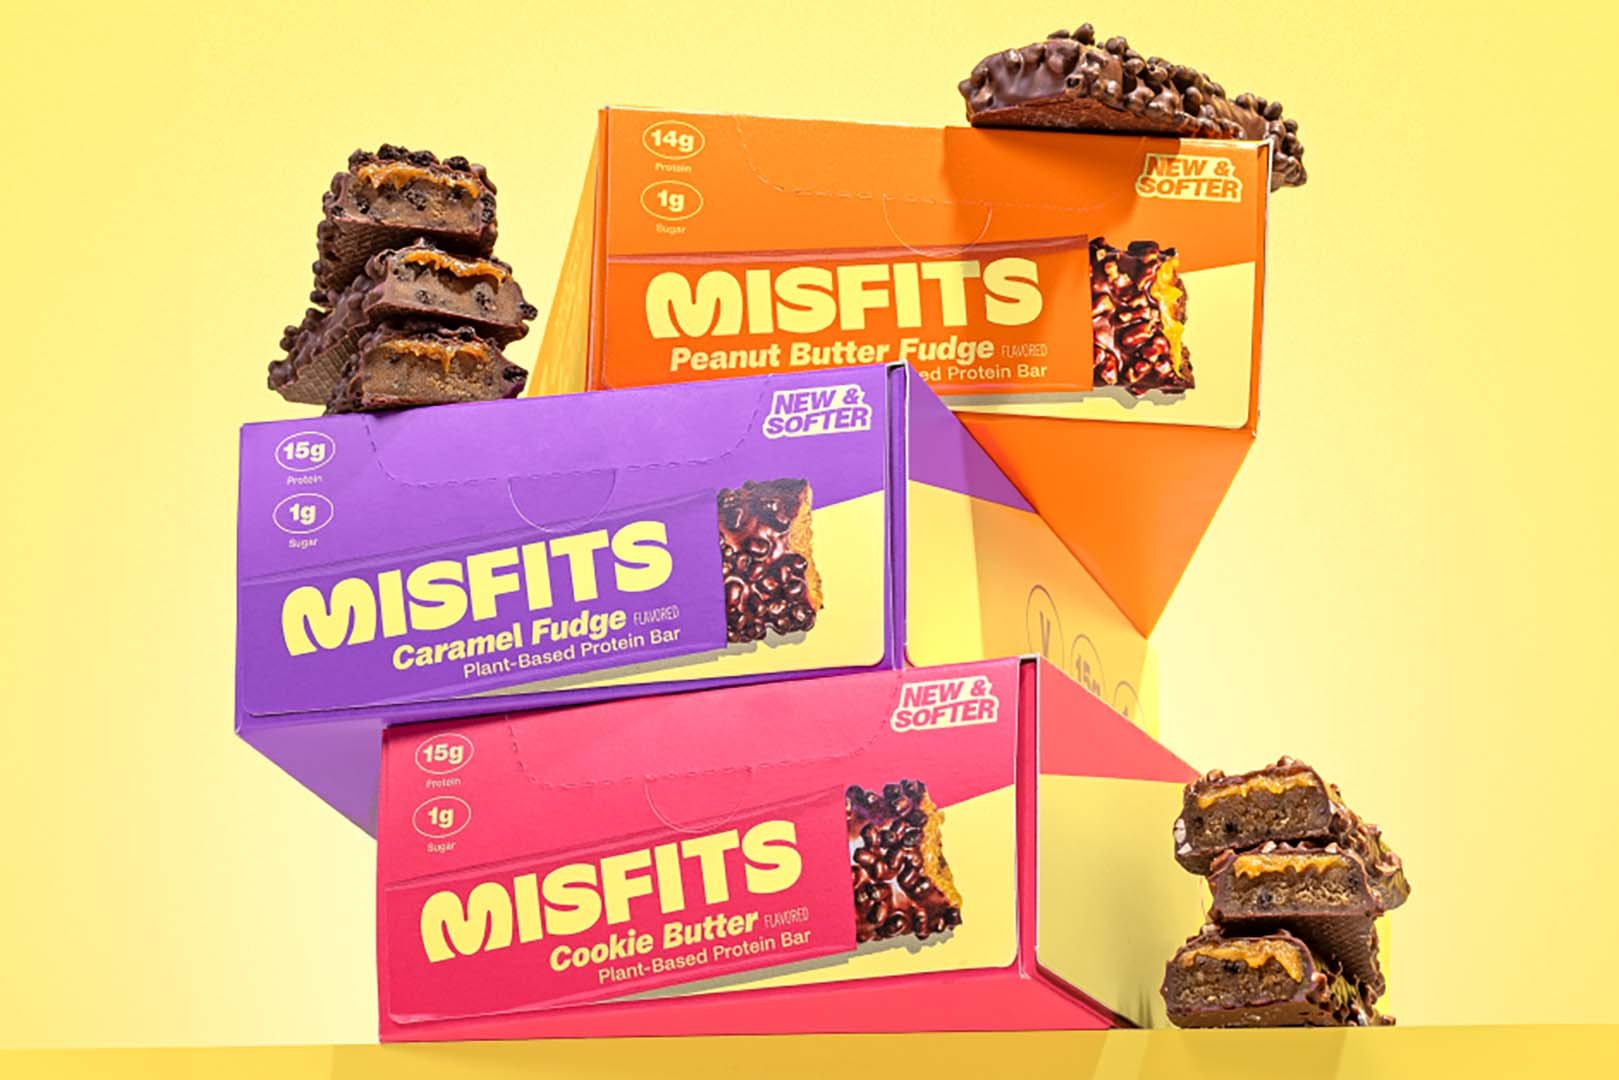 Softer Misfits Protein Bar blends its vegan recipe with better texture